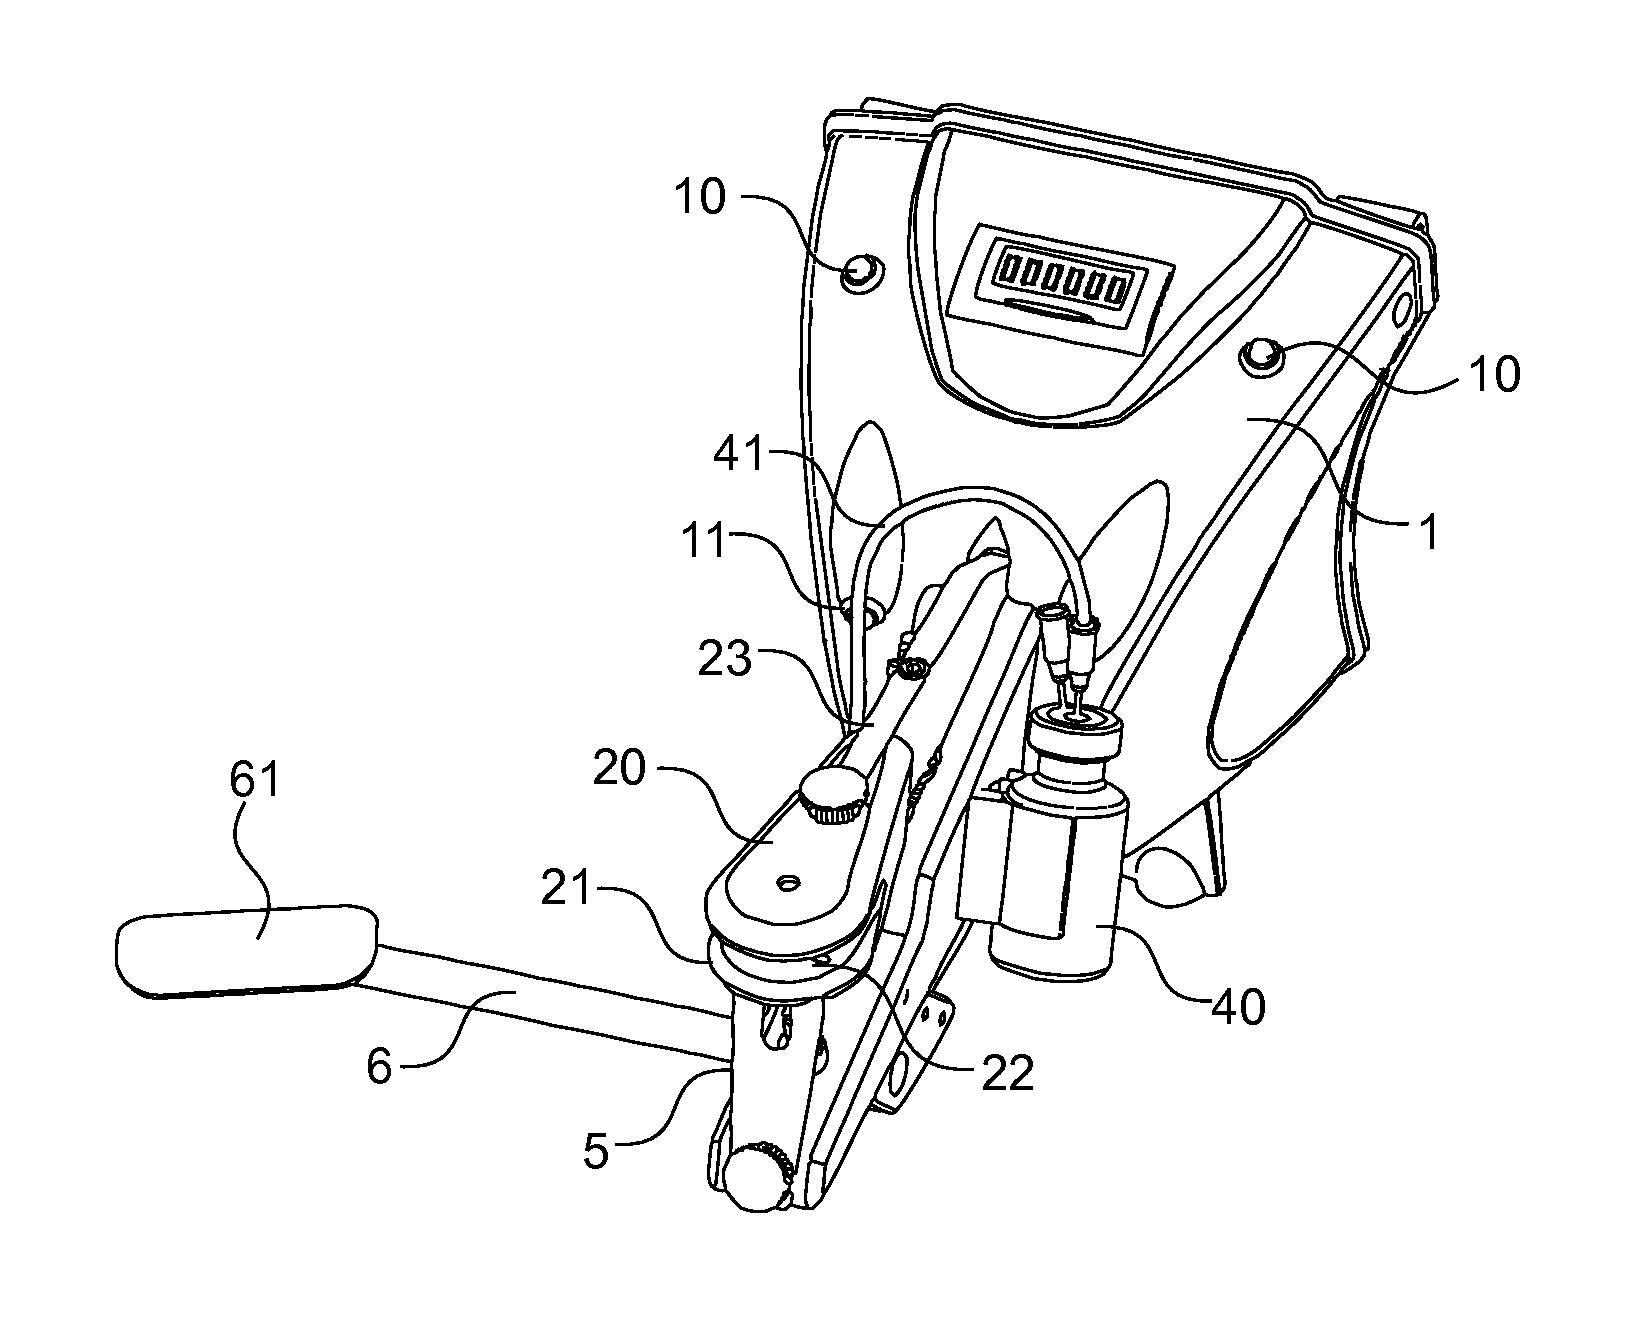 Device for inoculating a veterinary product into a poultry bird's wing